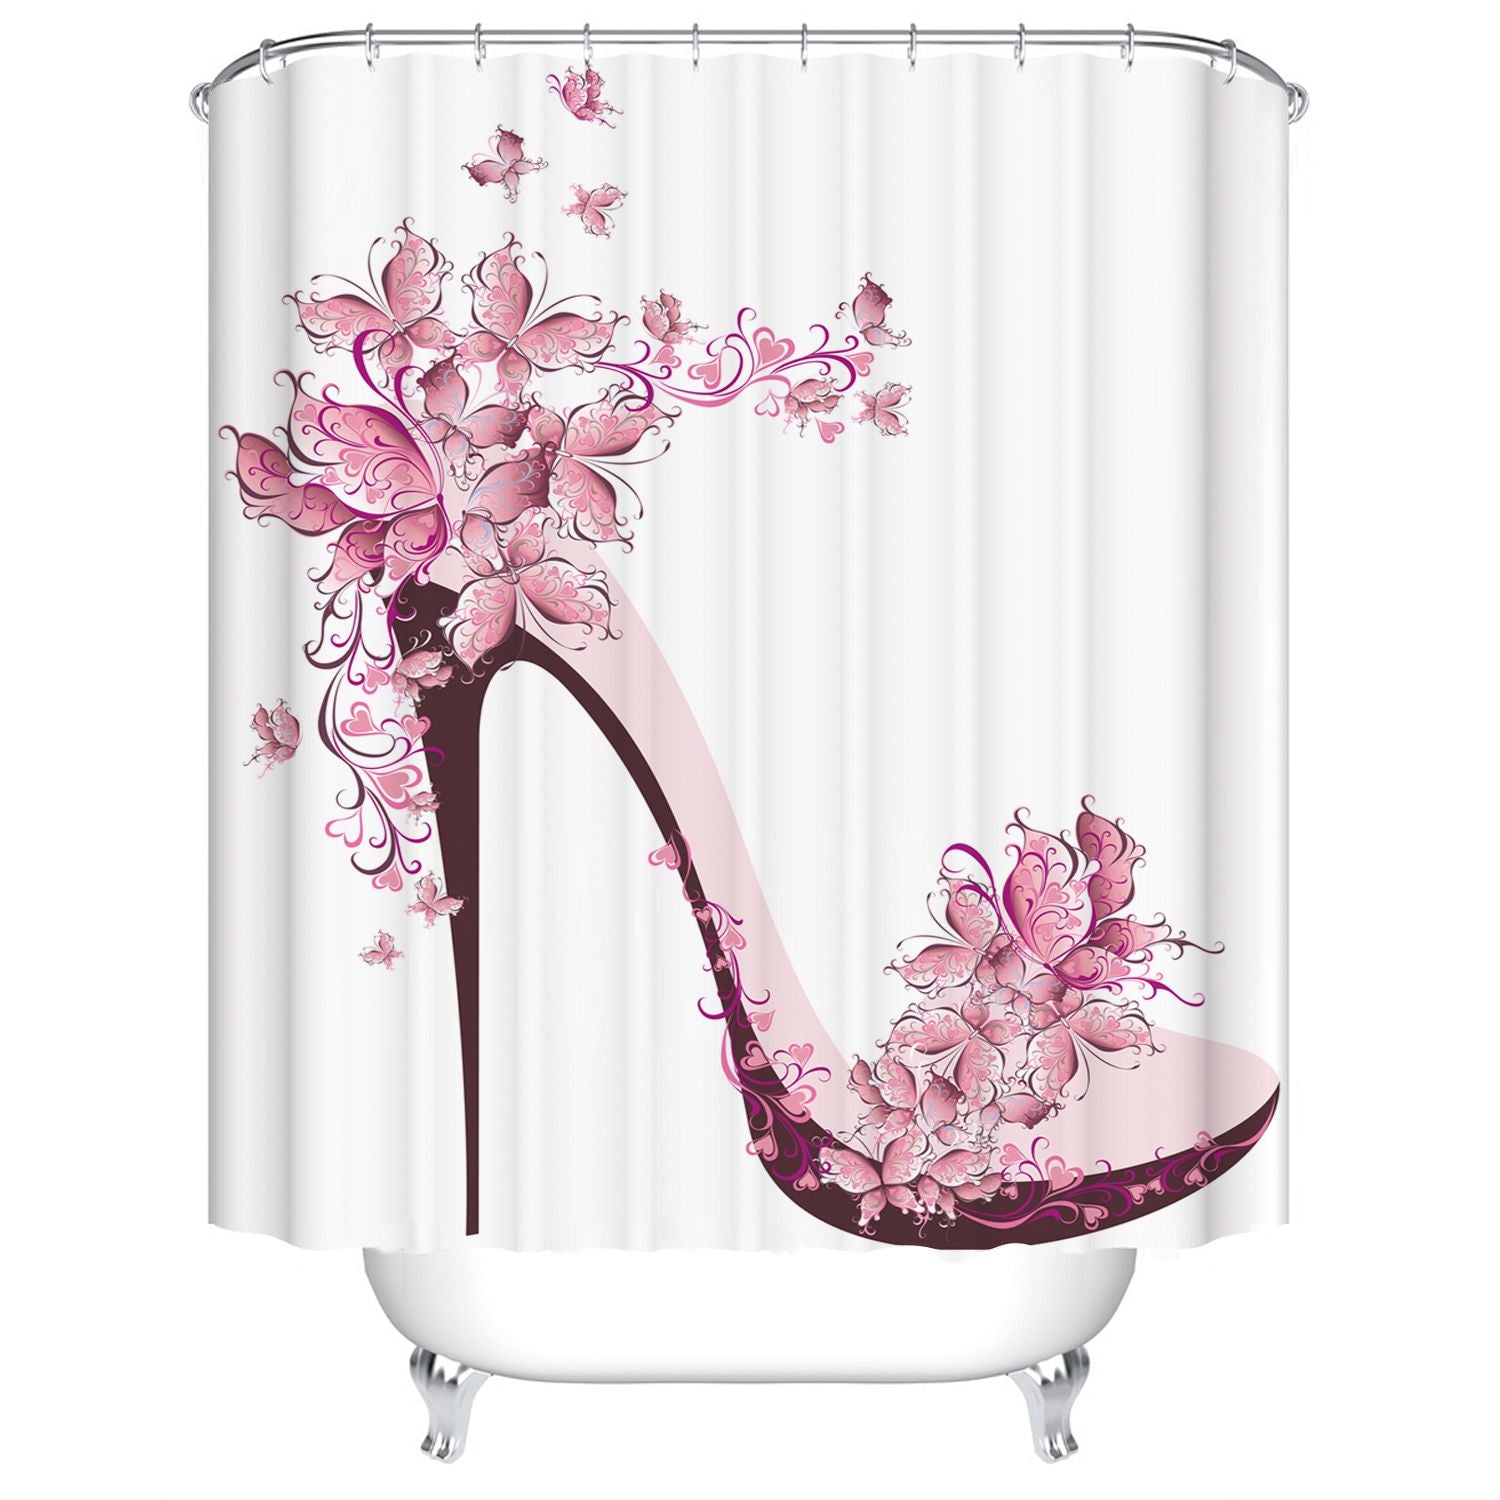 Pink High Heel Shoe Shower Curtain Butterfly with Floral